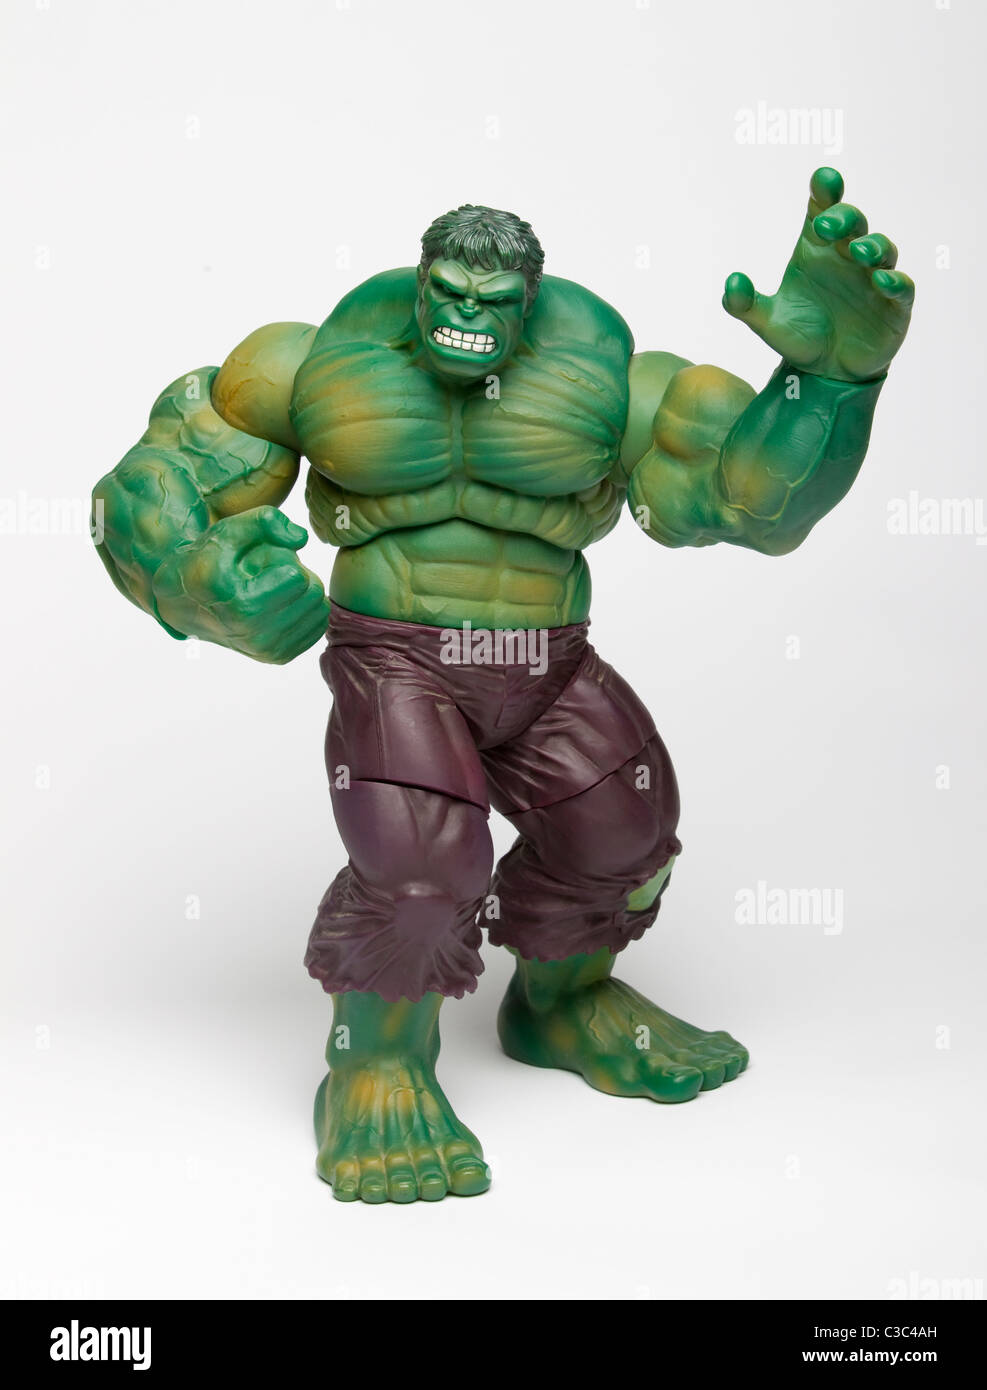 The incredible hulk child's toy Stock Photo